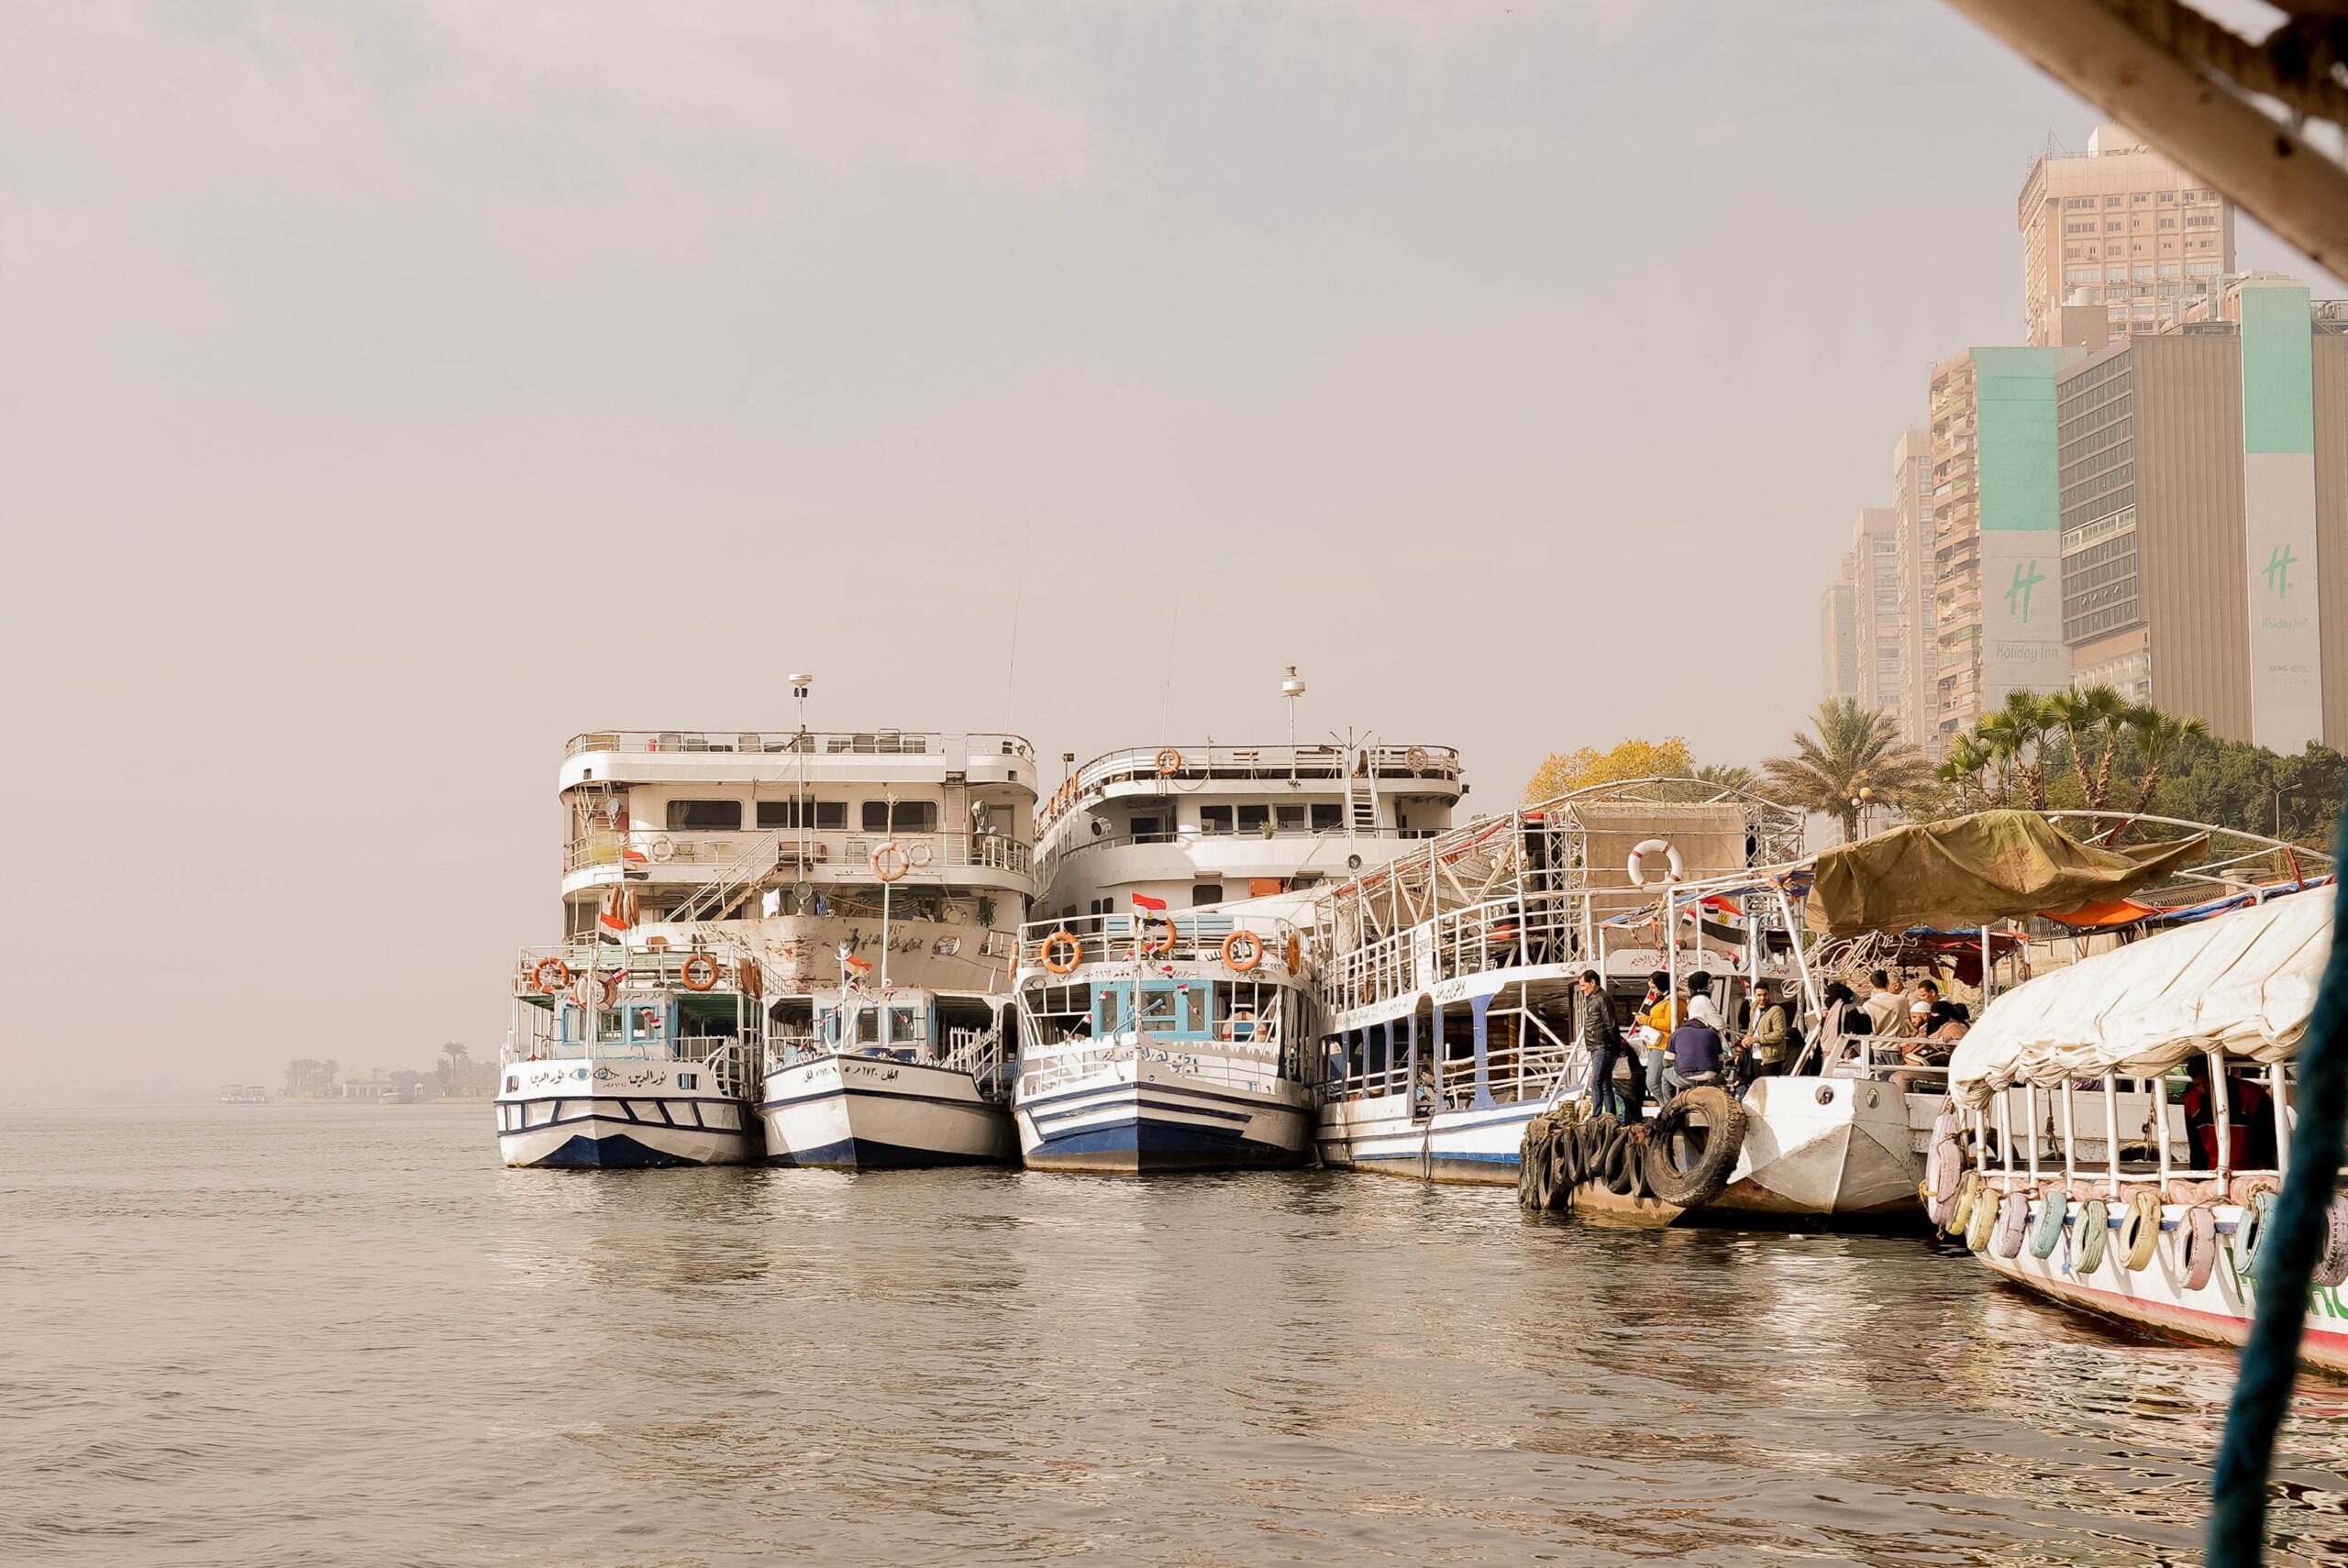 Travelers should try a river cruise on the Nile during a fall visit. 
Pictured: boats on the Nile